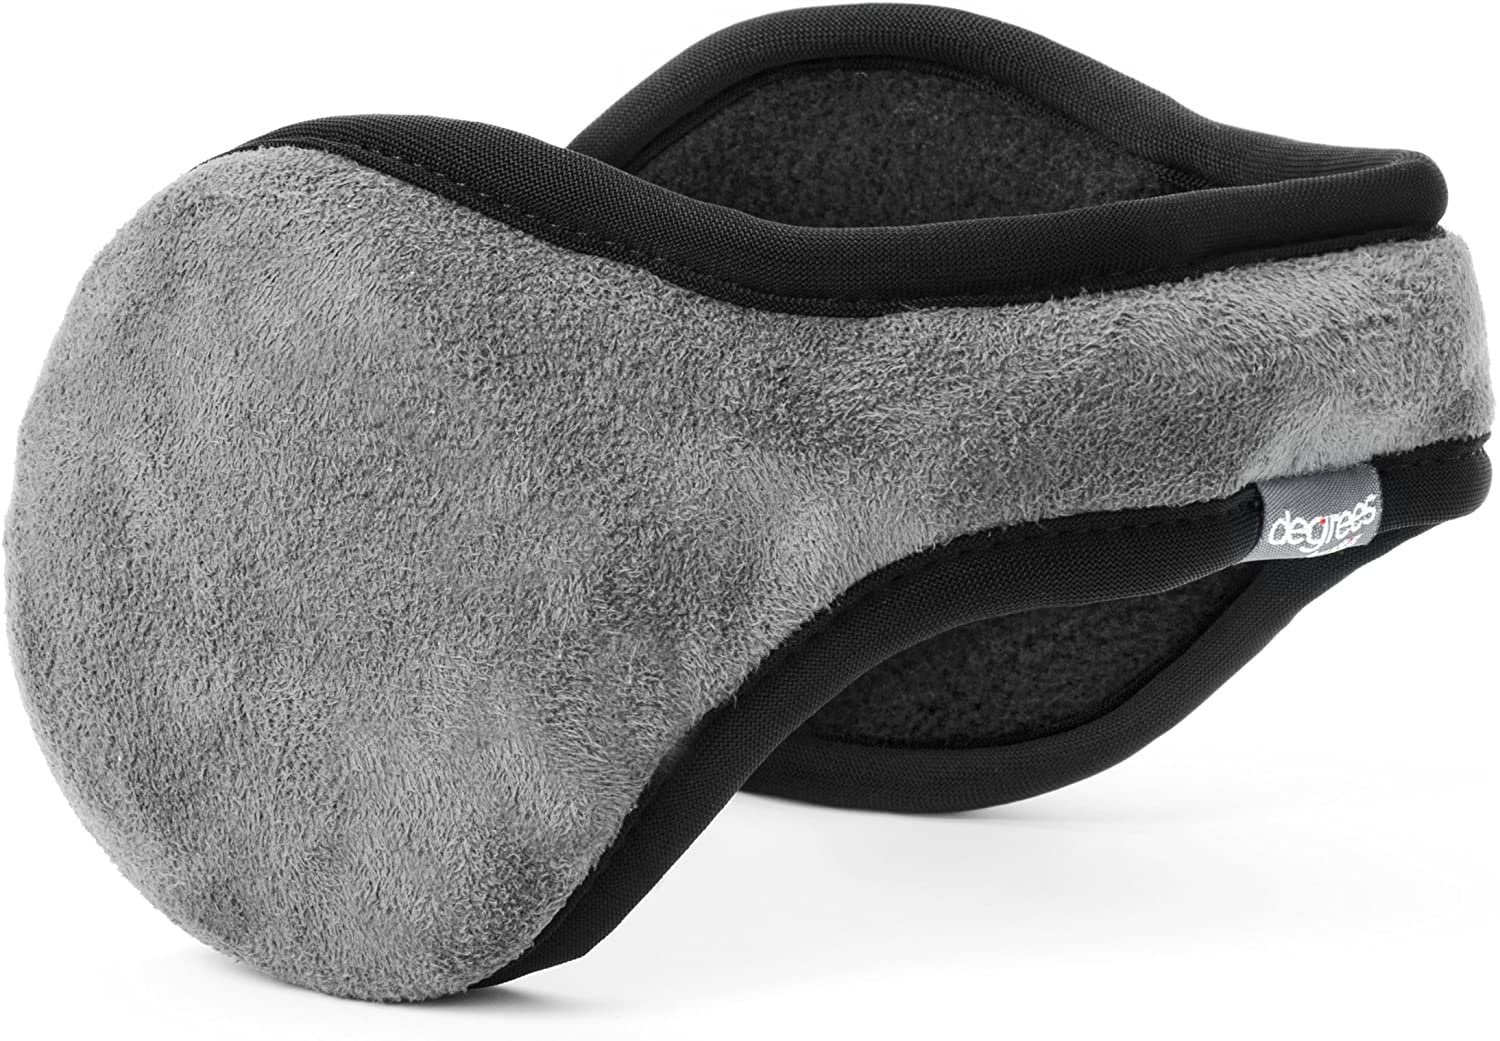 NEW degrees by 180's Ear Warmers Grey in original packaging  